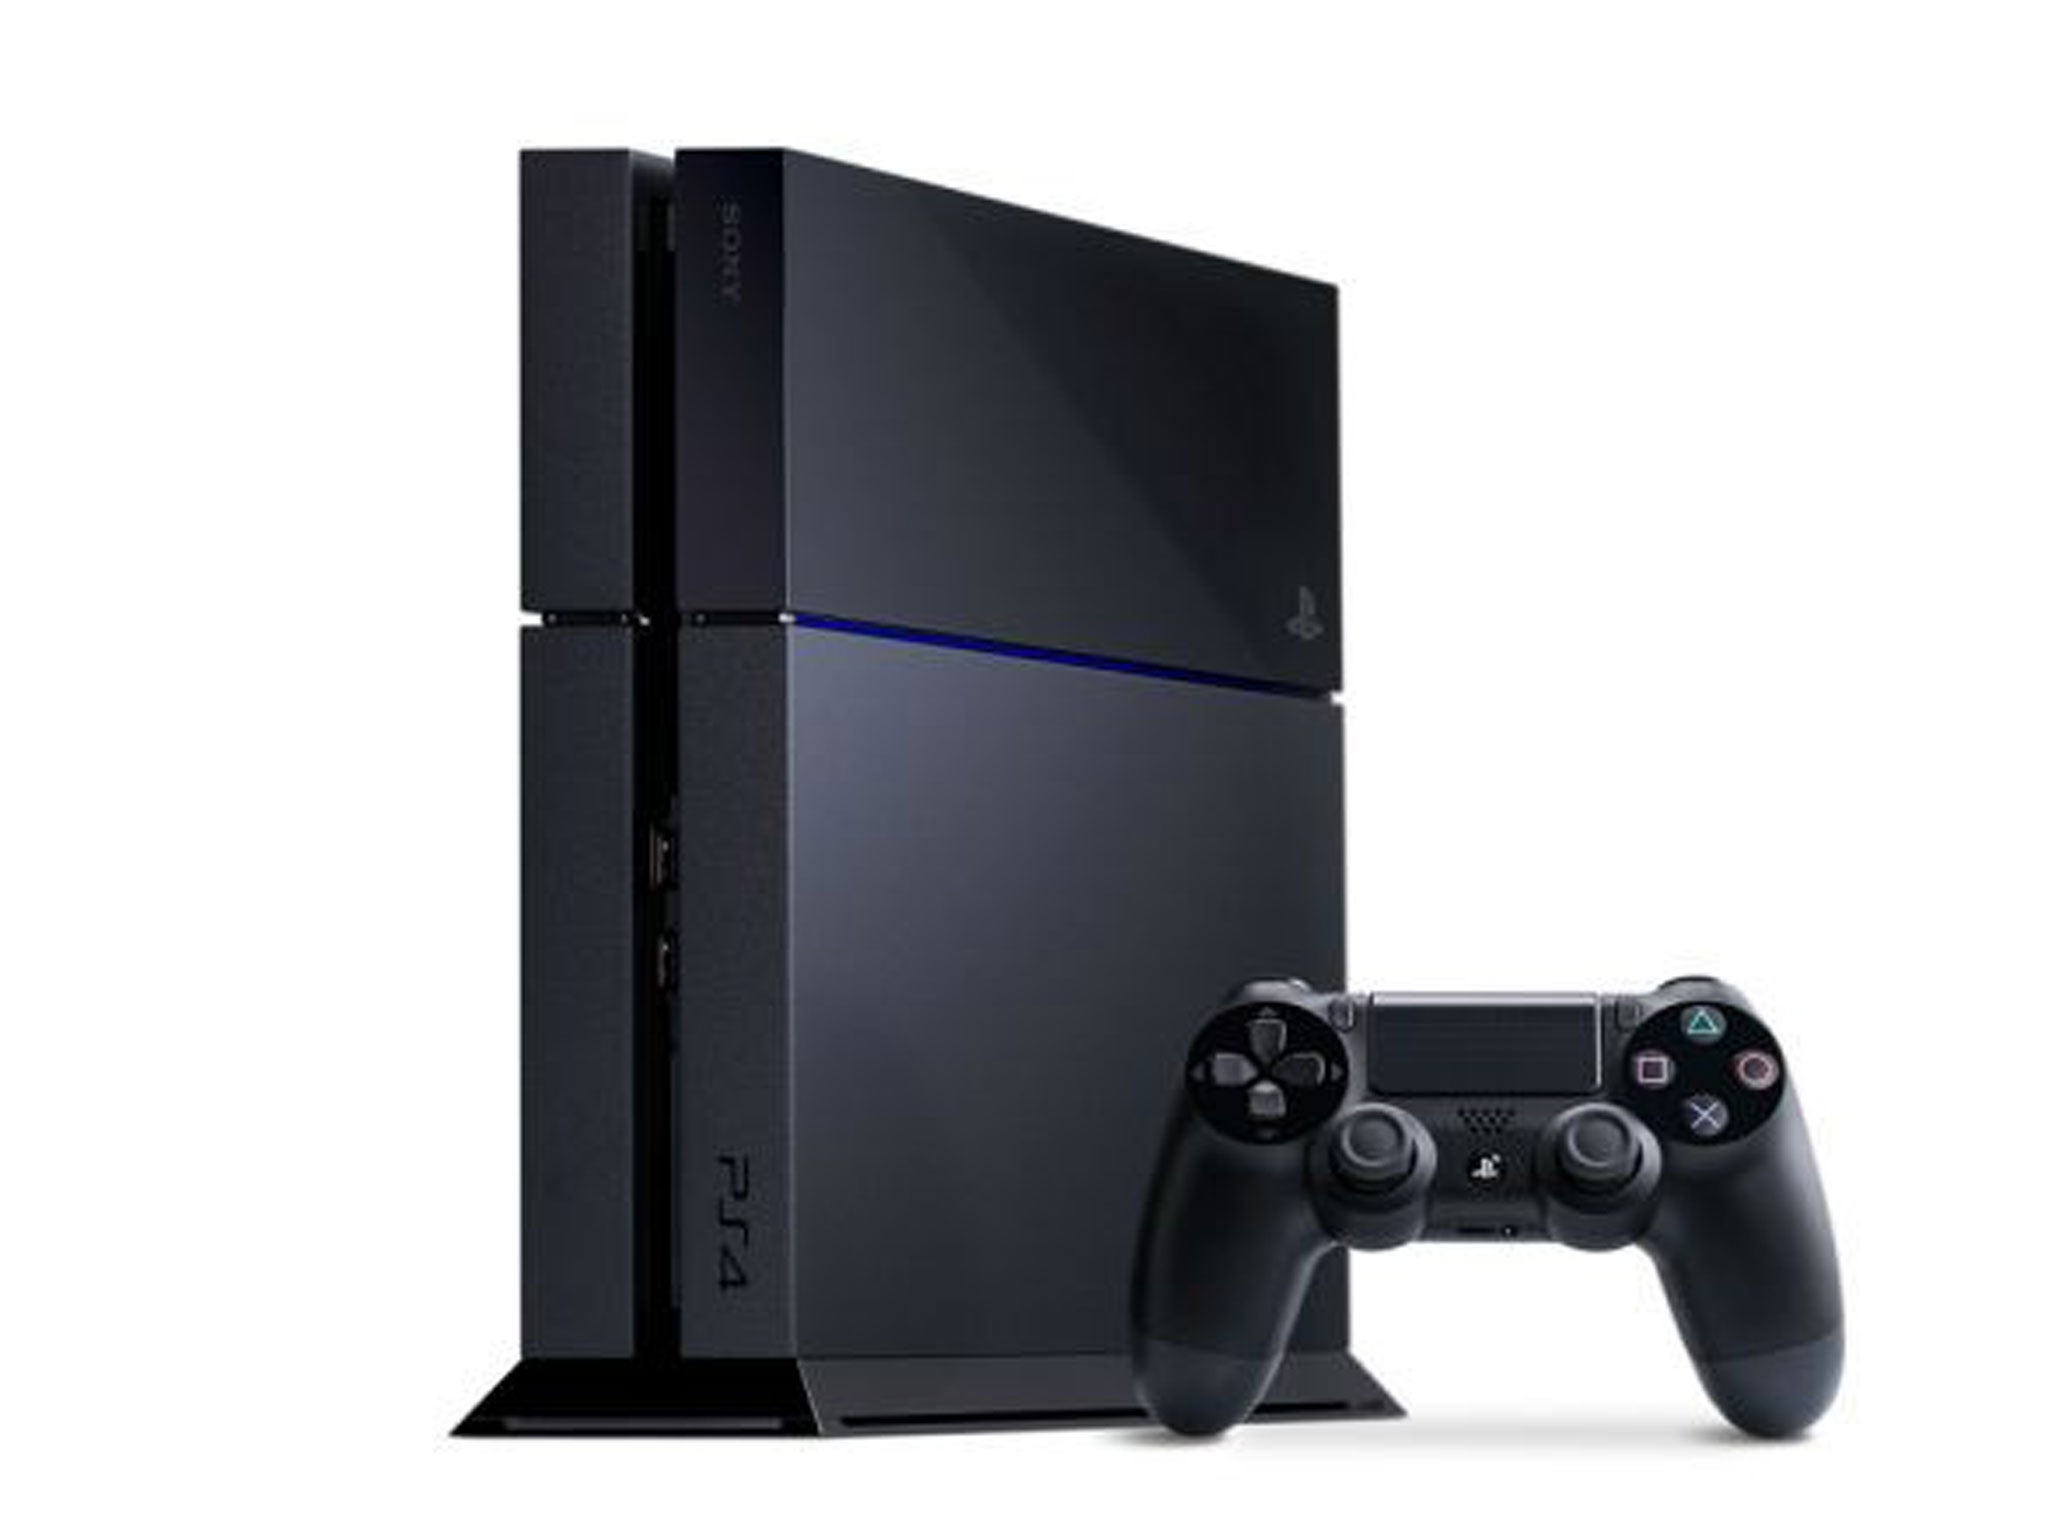 3 million PS4s will be sold by the end of 2013 and 5m by the end of March according to predictions by Sony